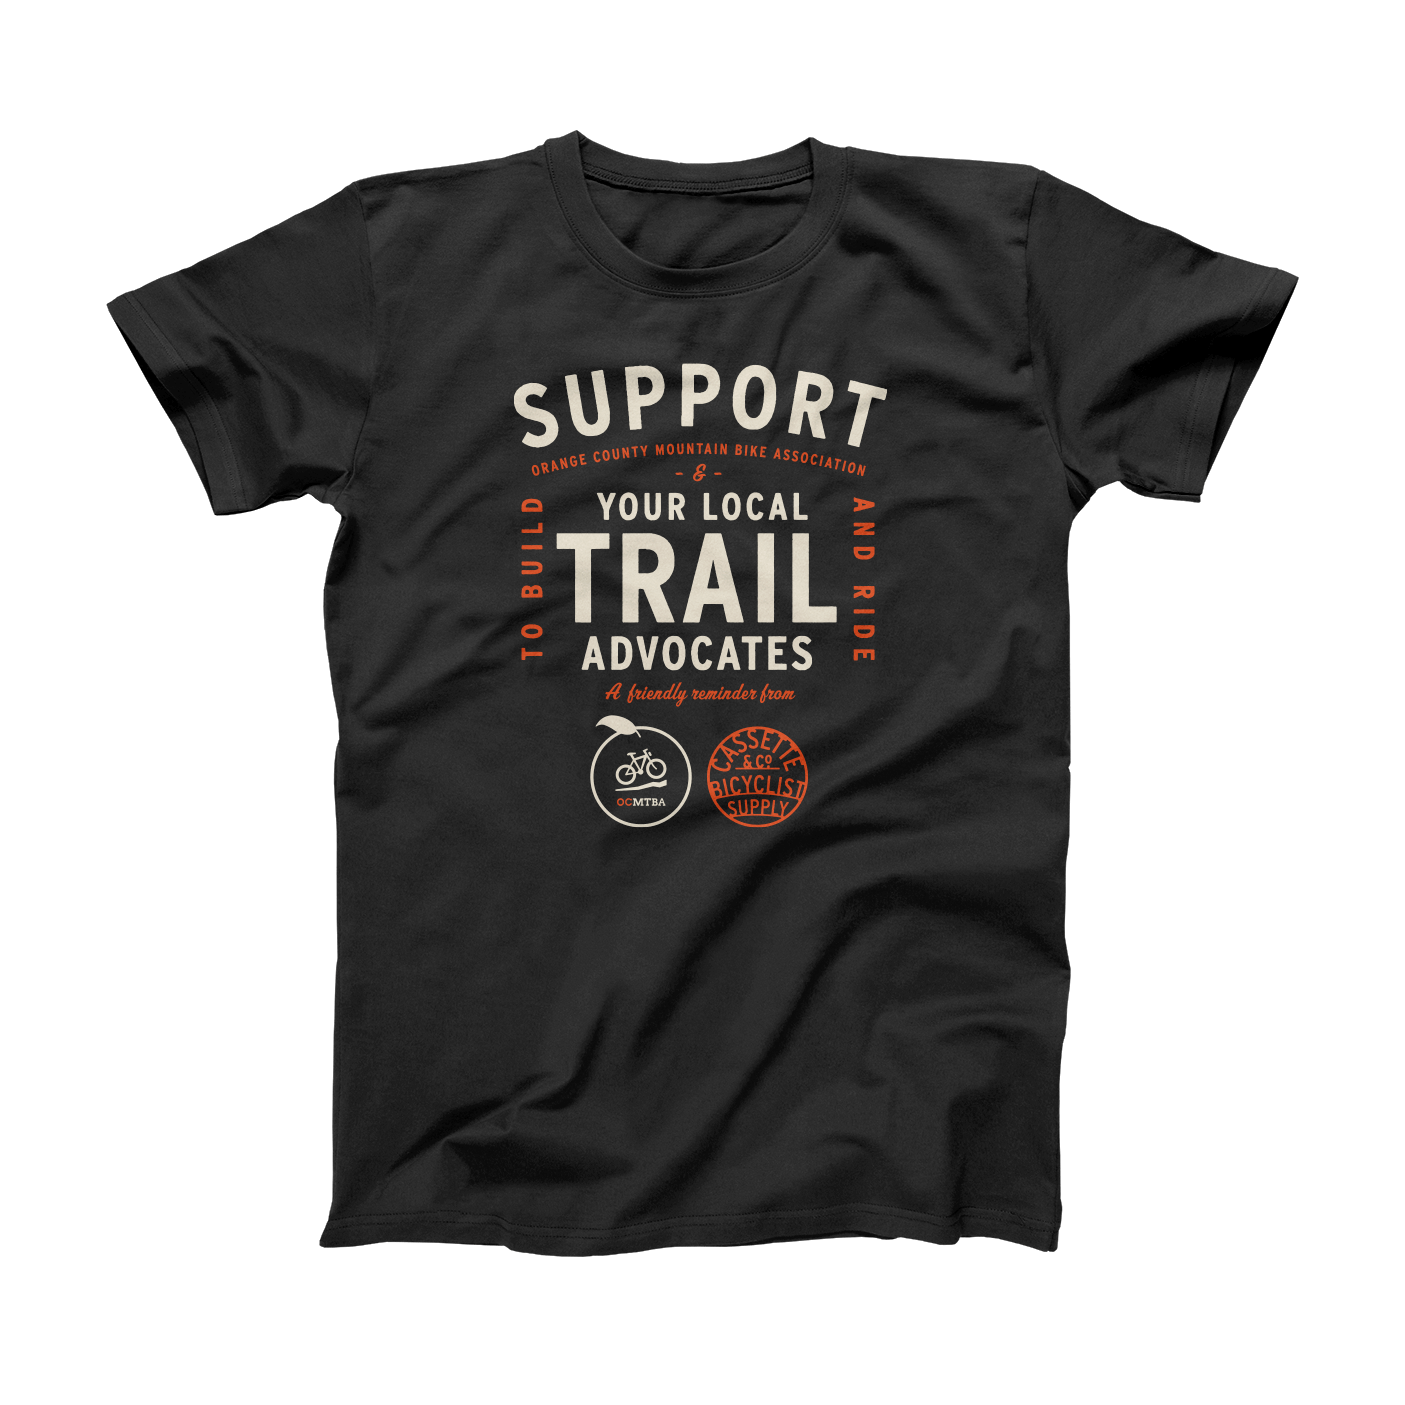 OCMTBA Trail Advocate tee in black with 2 color print